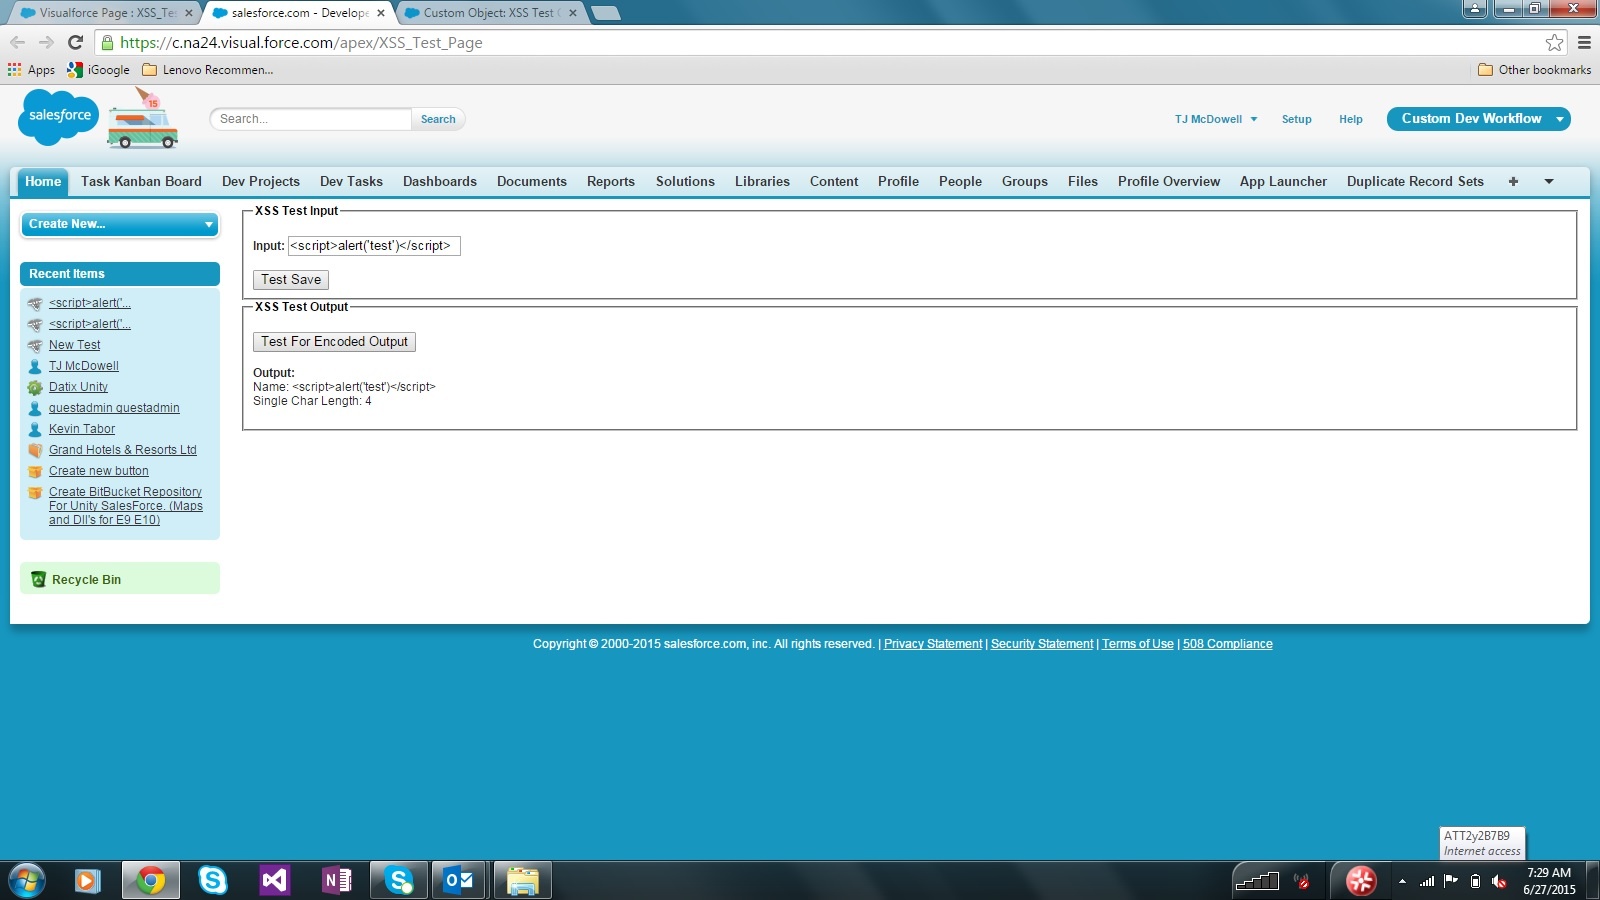 Visualforce XSS Test Page Rendered